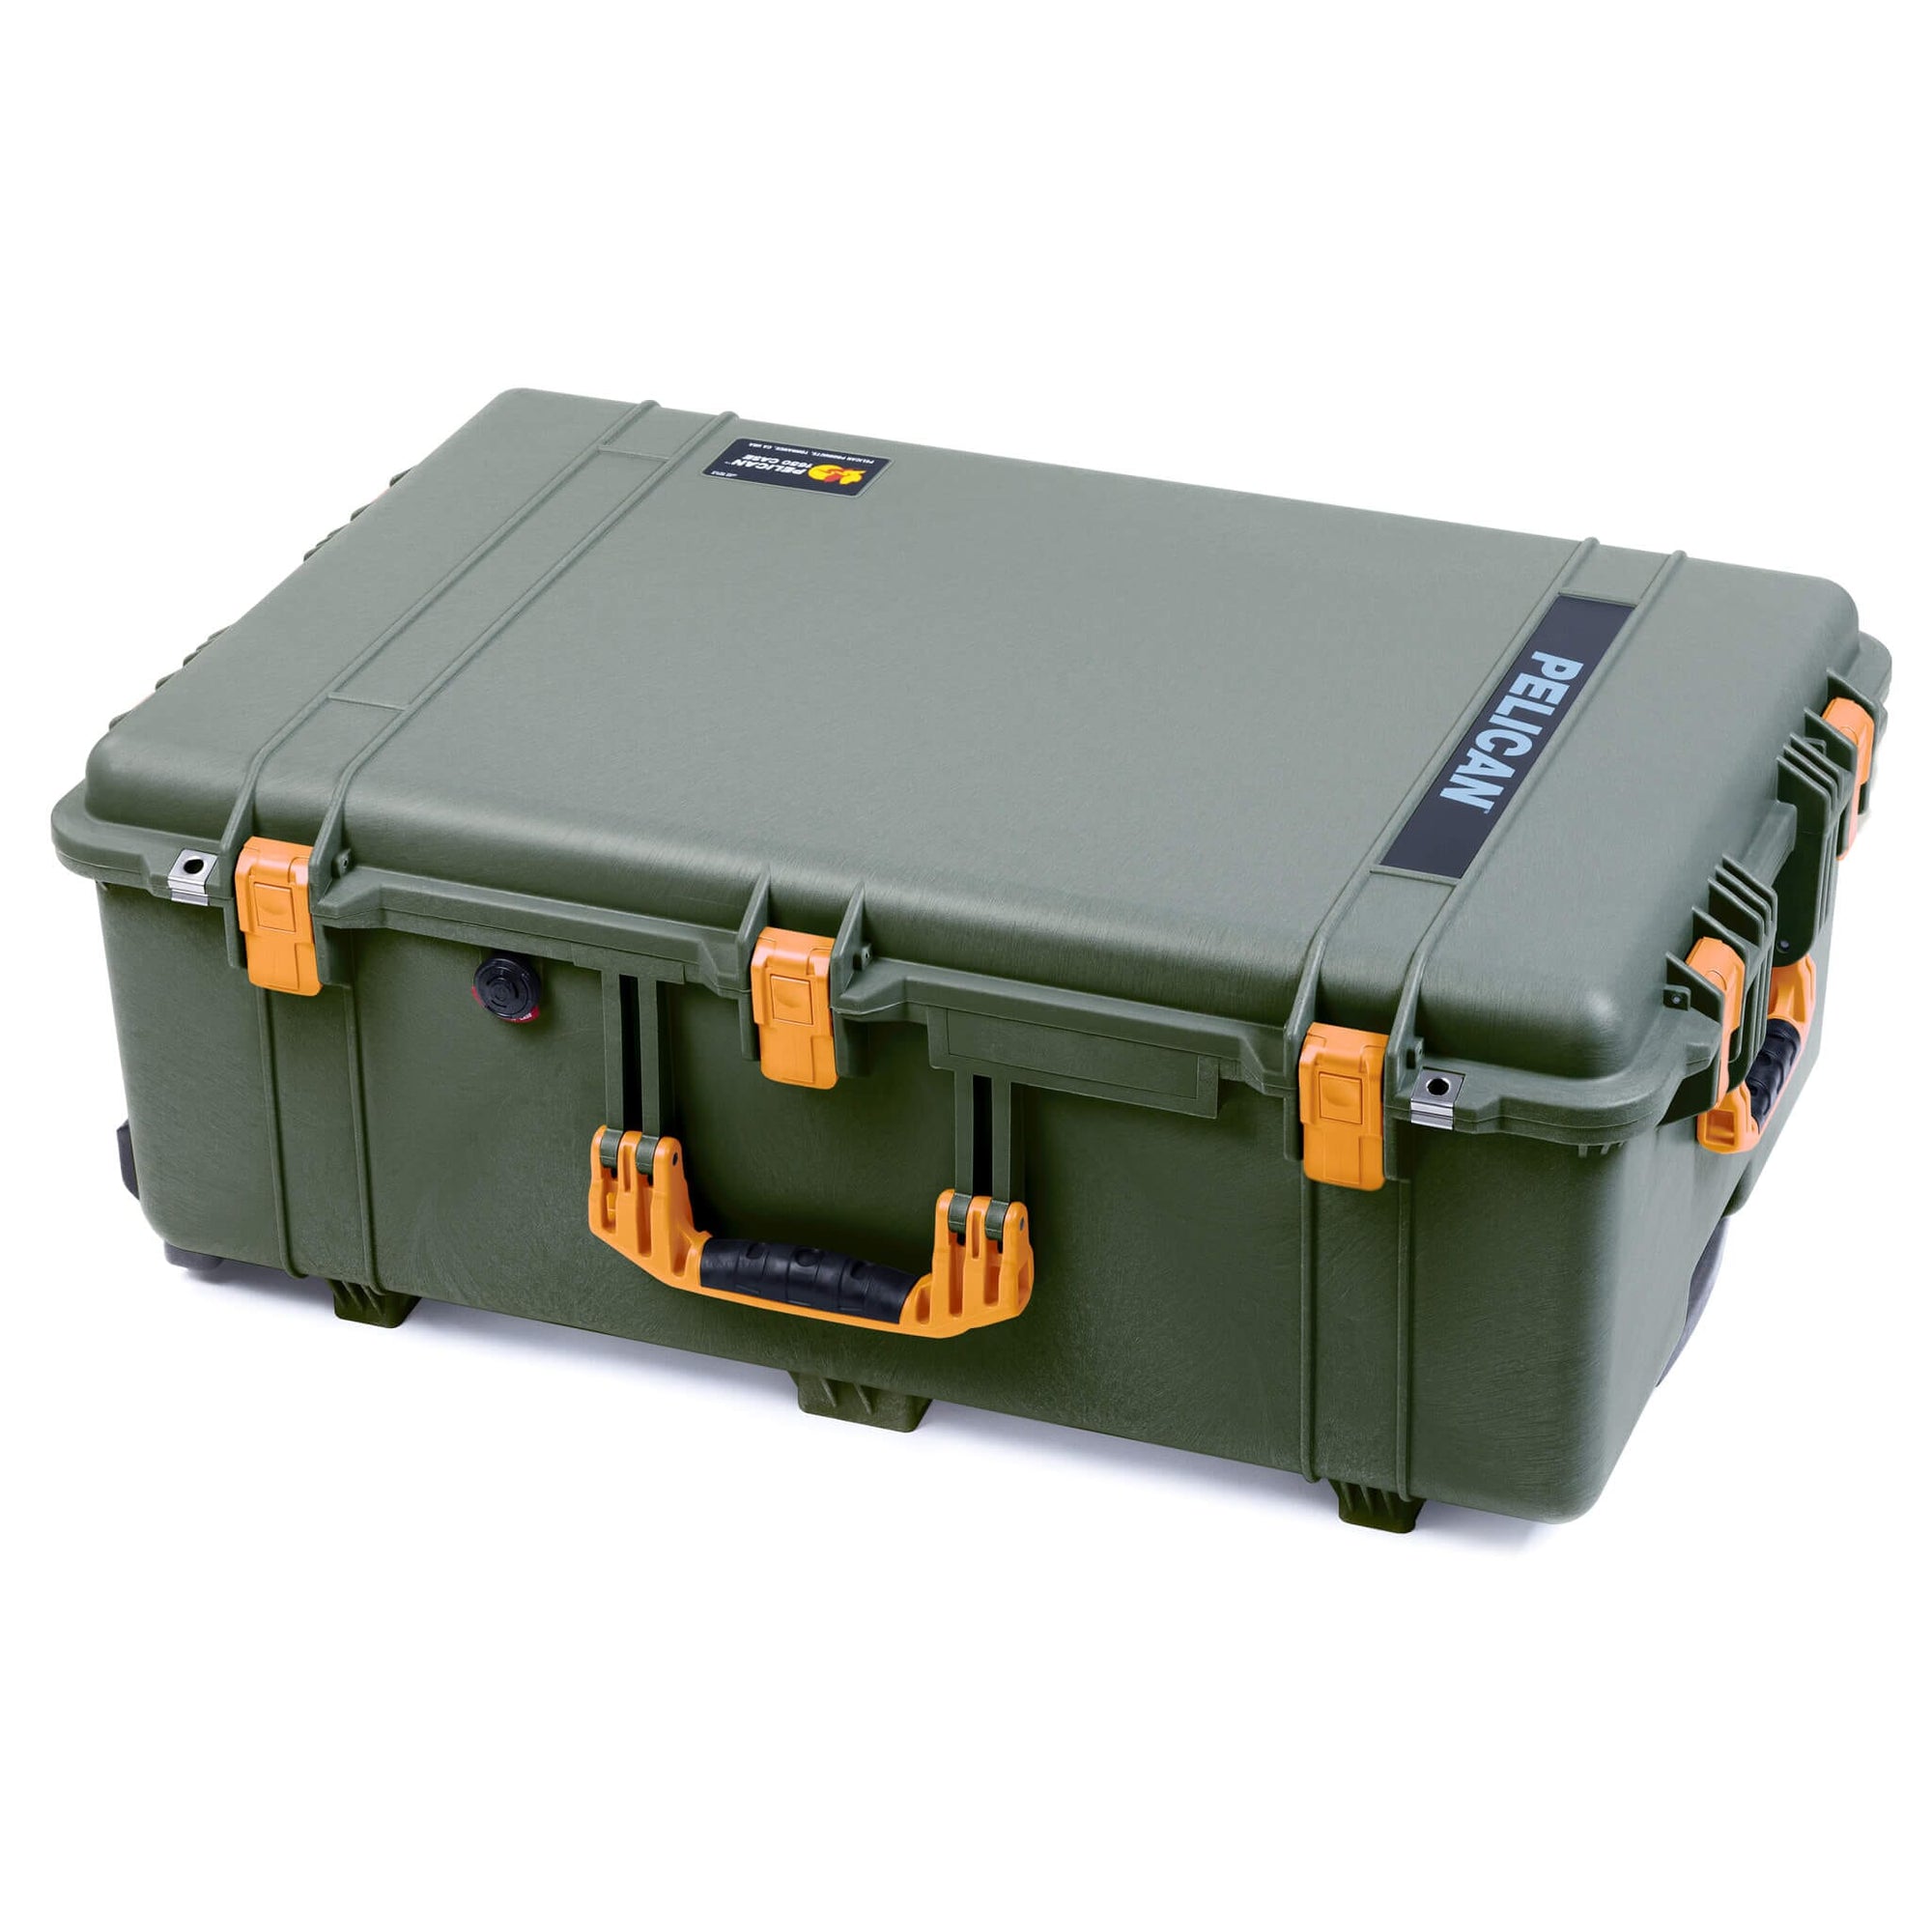 Pelican 1650 Case, OD Green with Yellow Handles & Push-Button Latches ColorCase 